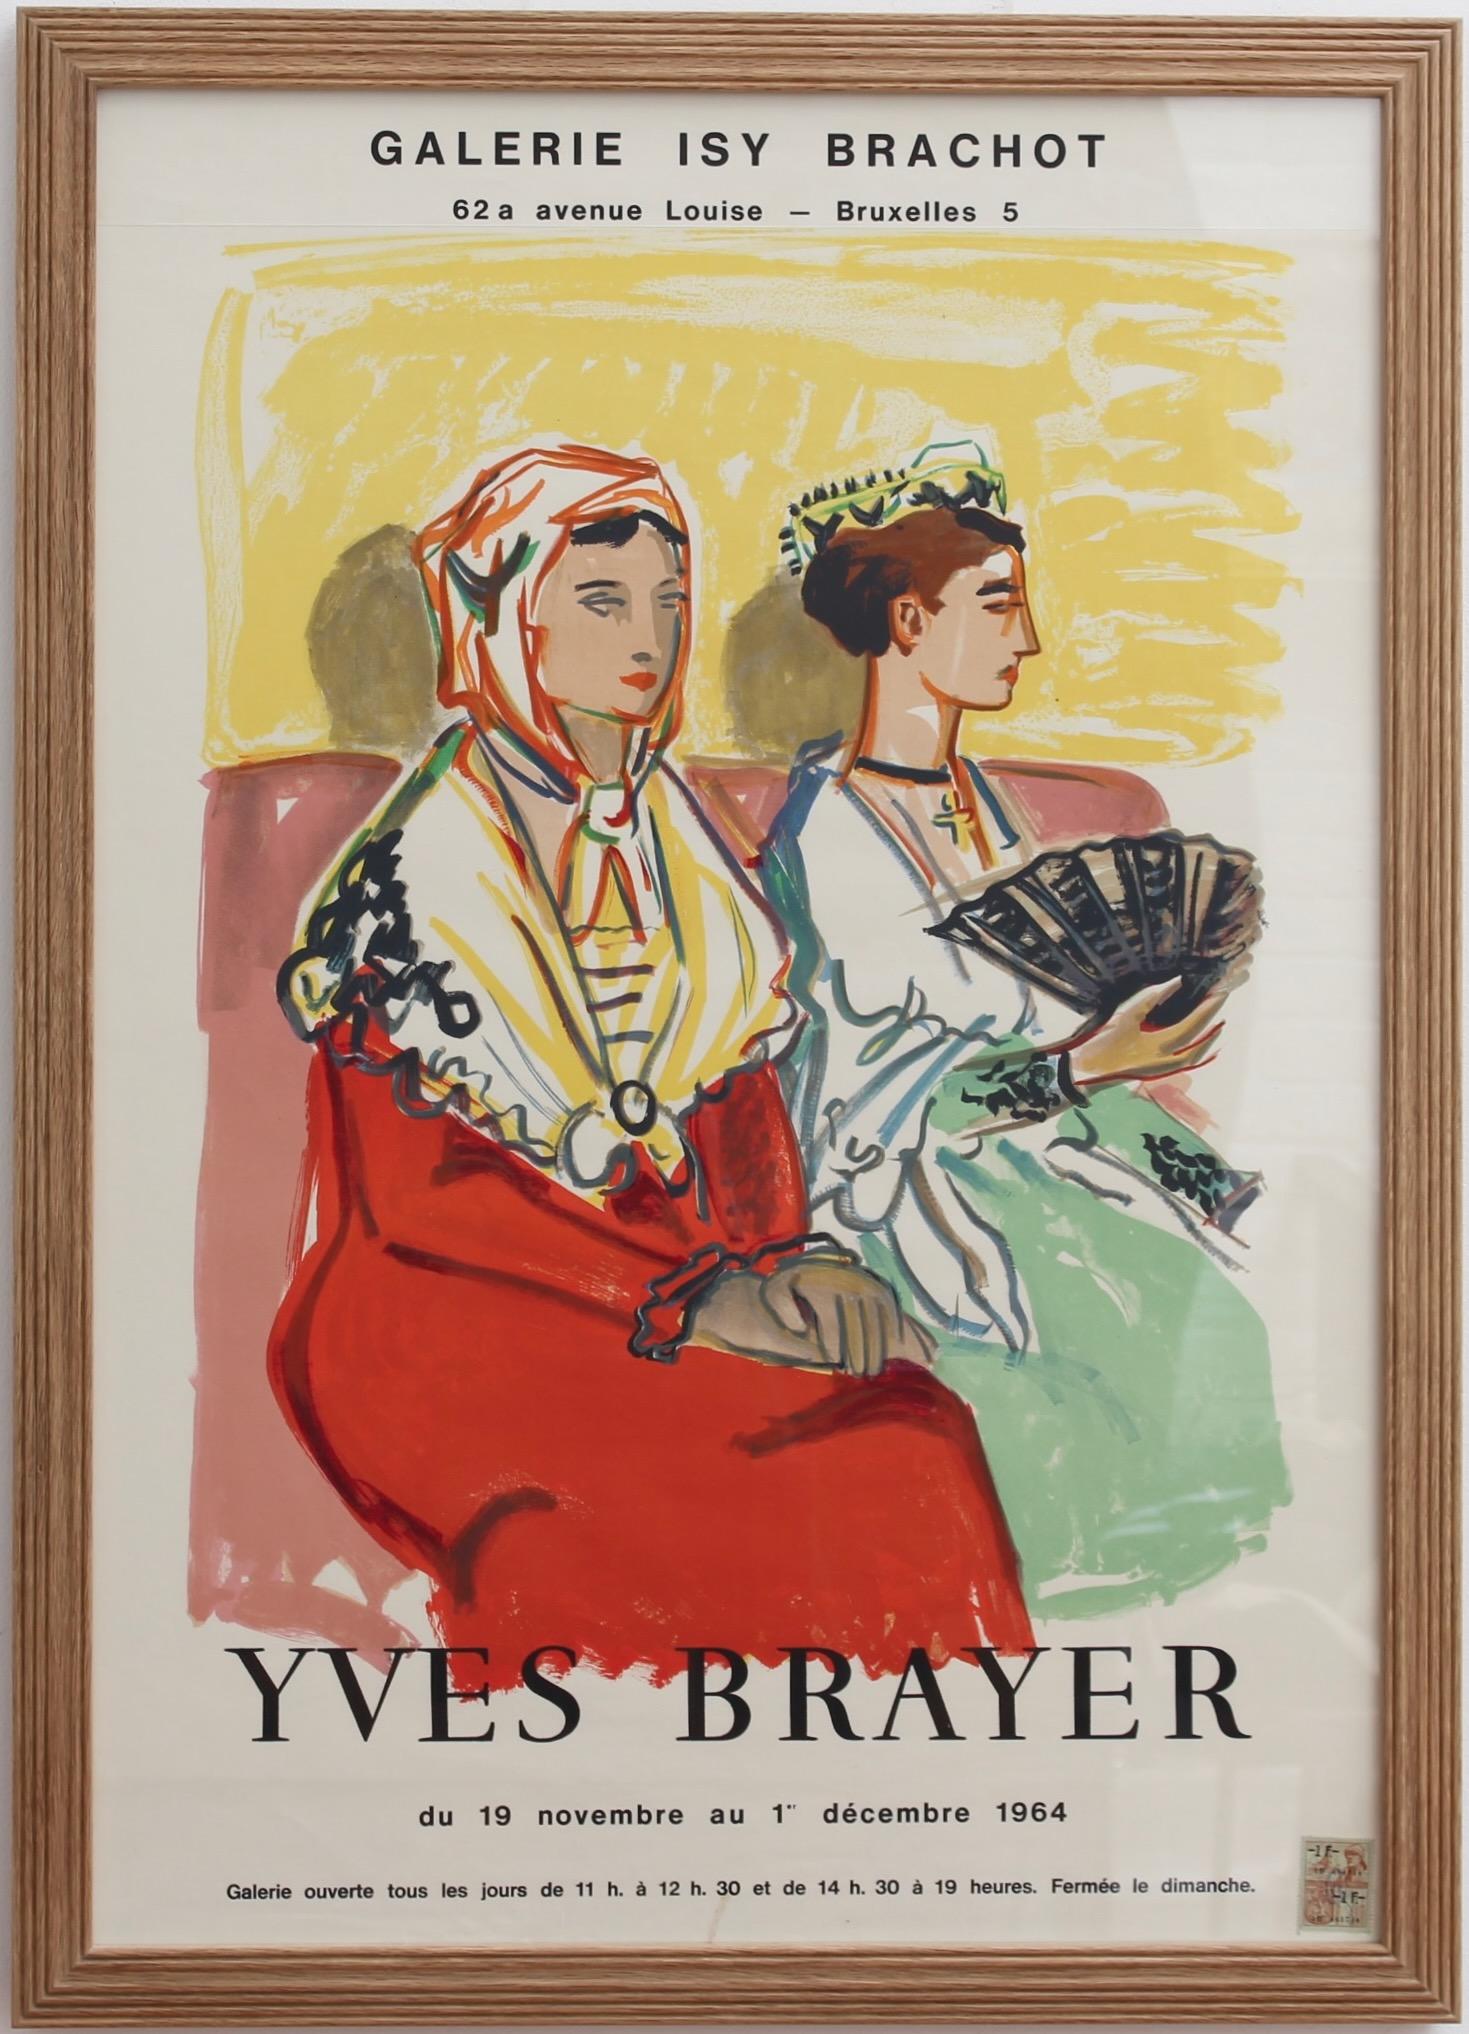 French Vintage Exhibition Poster for Yves Brayer (1964). Newly framed, the poster announces an exhibition of the works of Yves Brayer at the Galerie Isy Brachot in Brussels, Belgium. Discovered in the South of France, this gallery holds several Yves